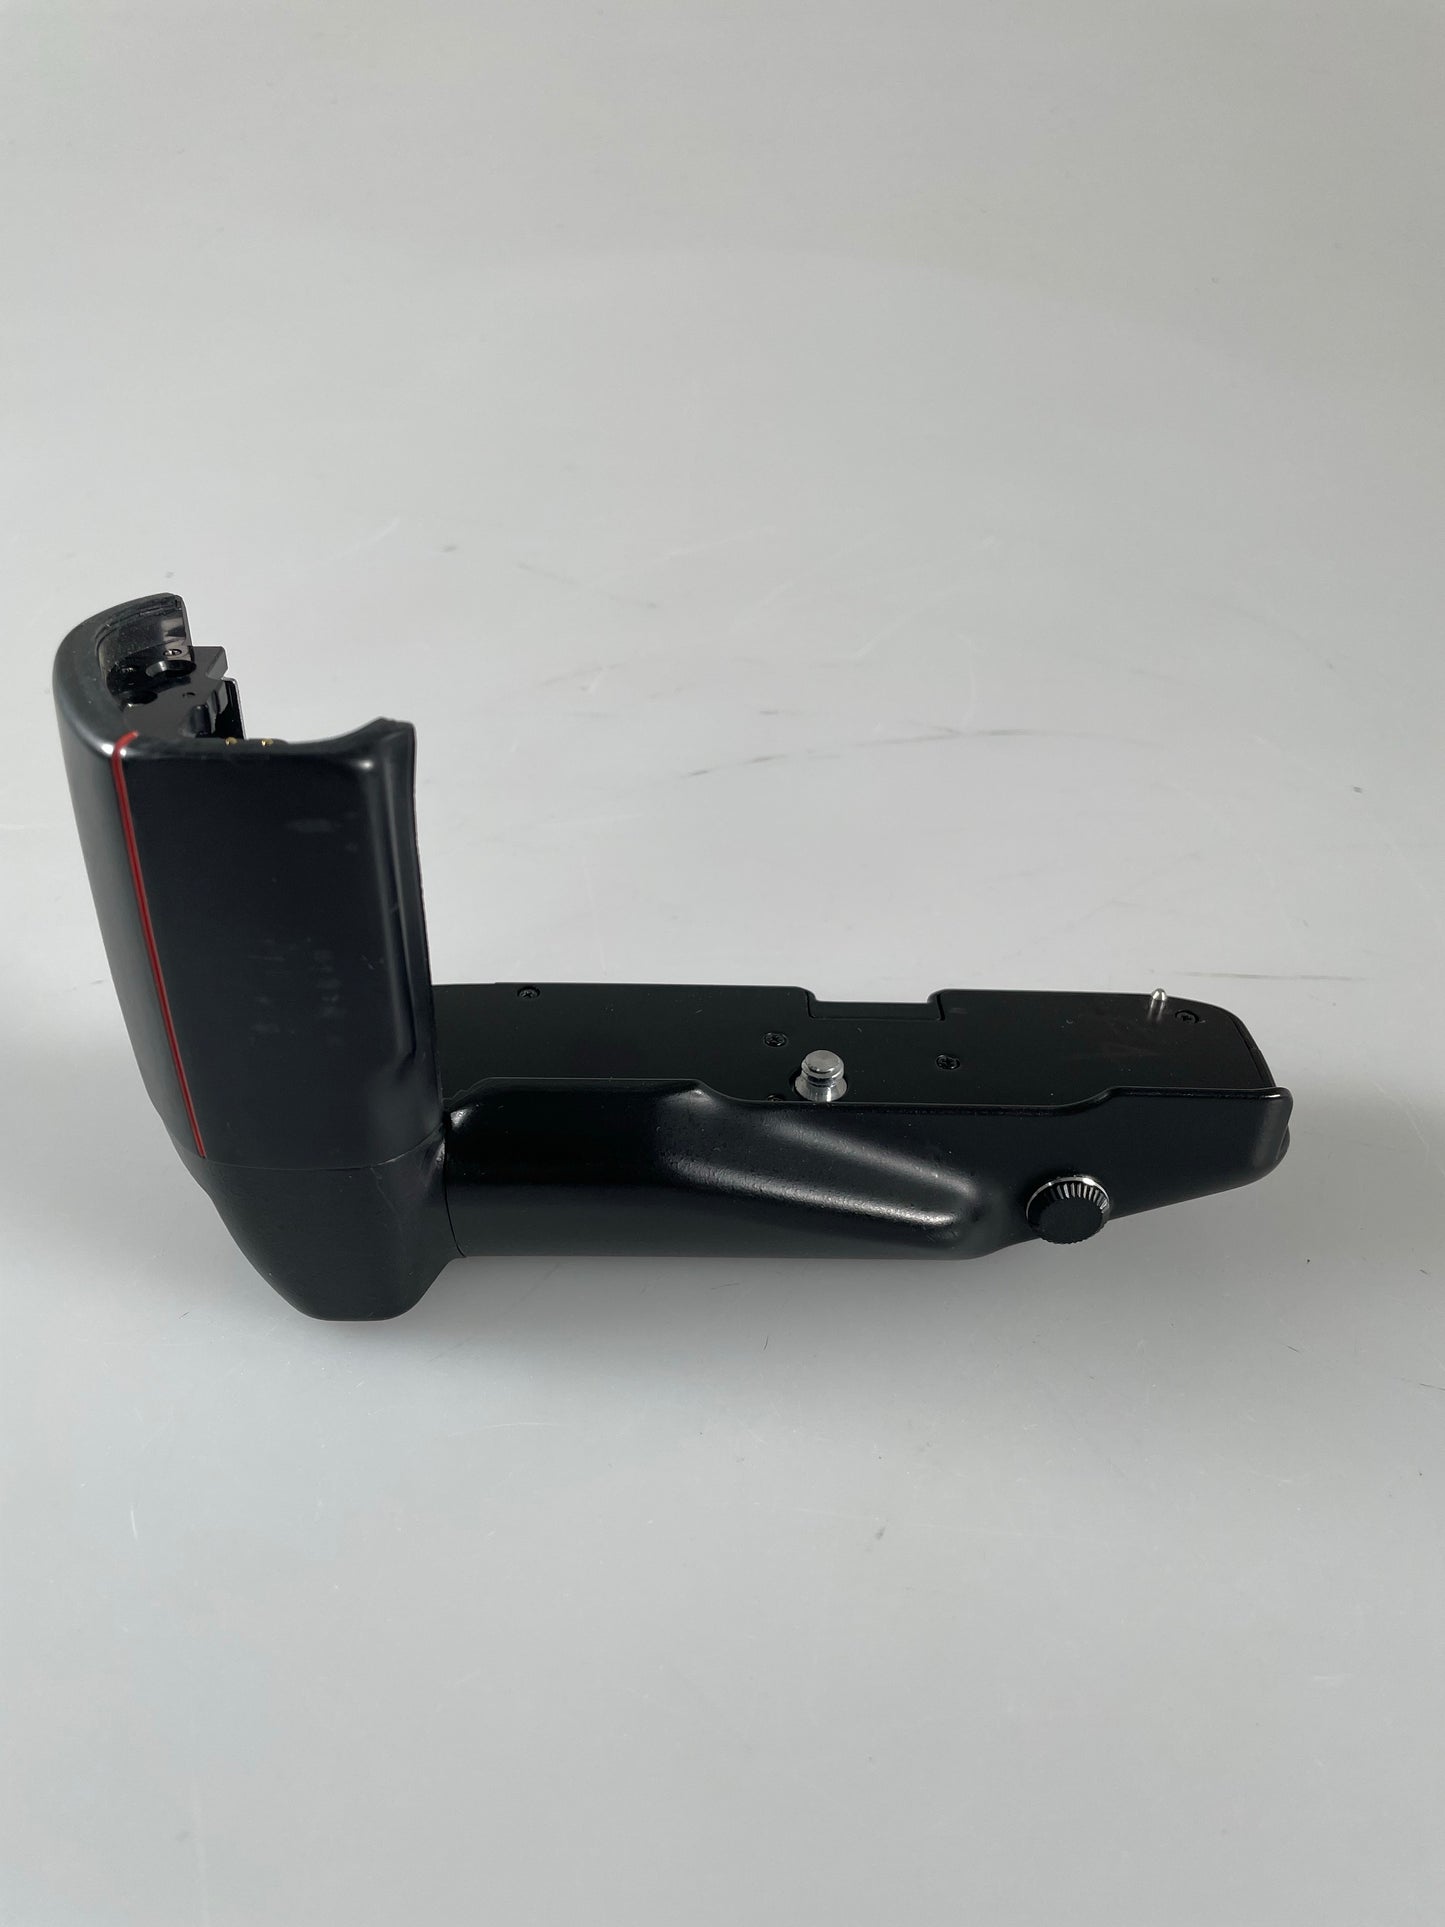 Nikon MB-21 High Speed Battery Pack Grip For F4 F4s